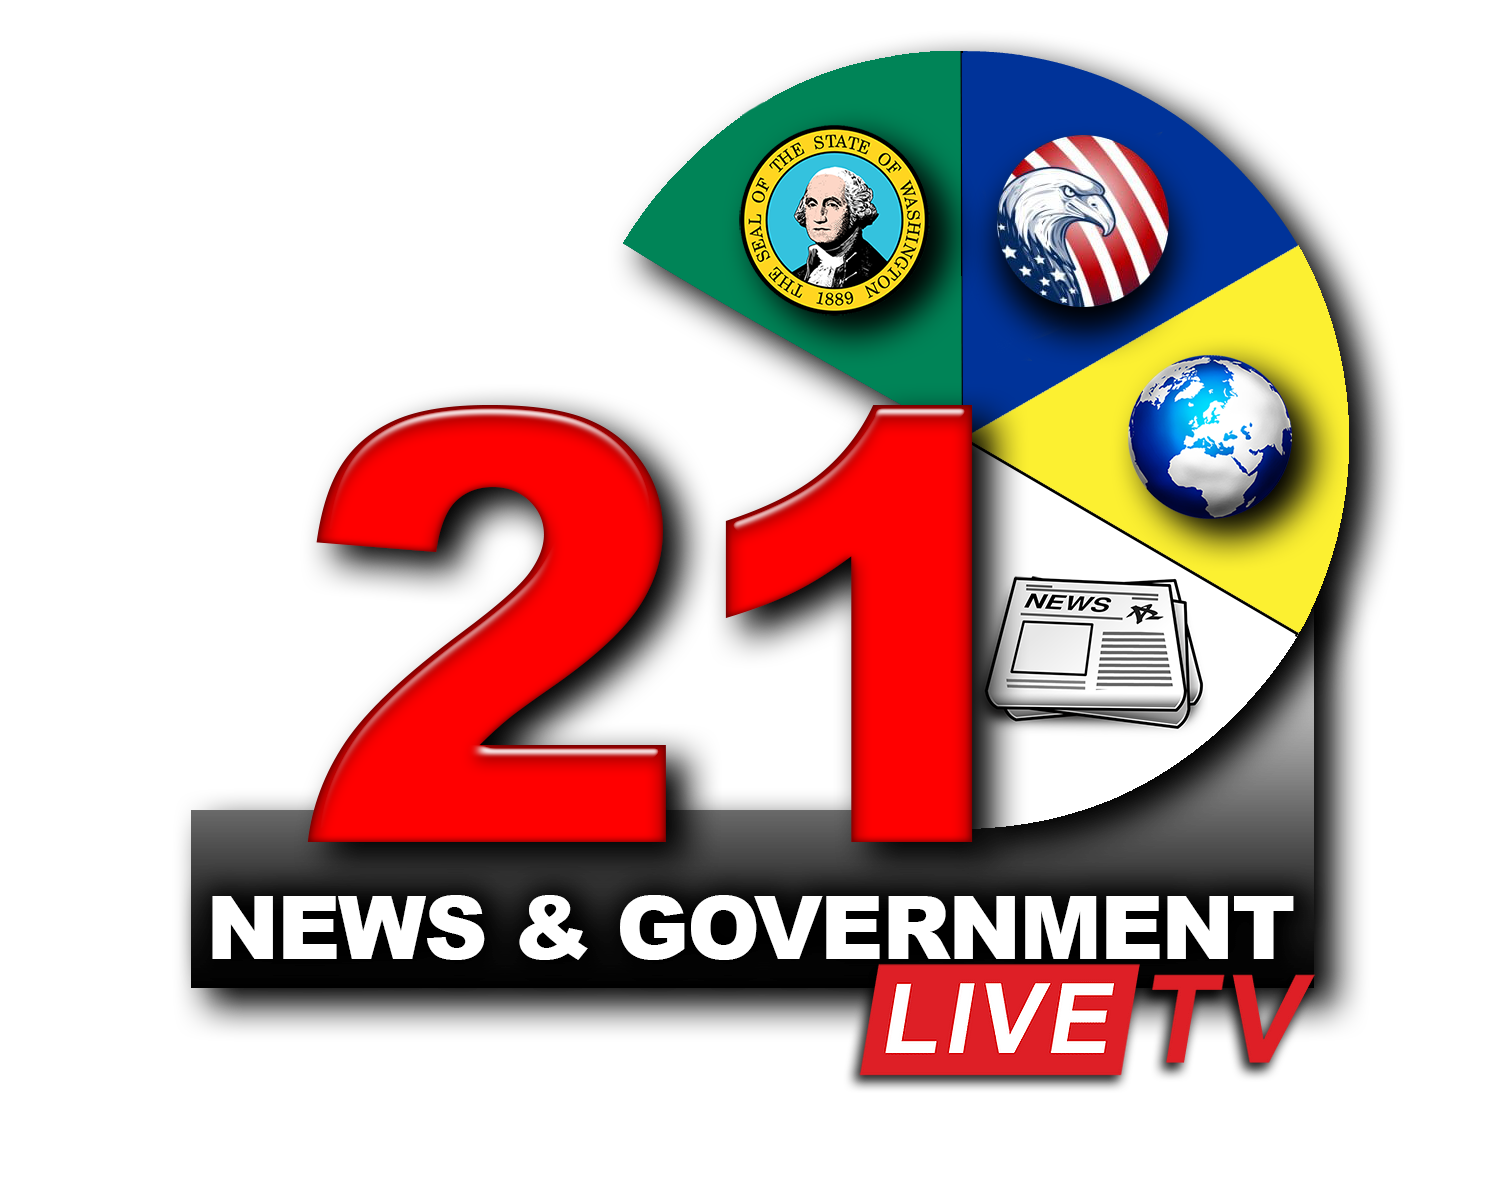 Channel 21